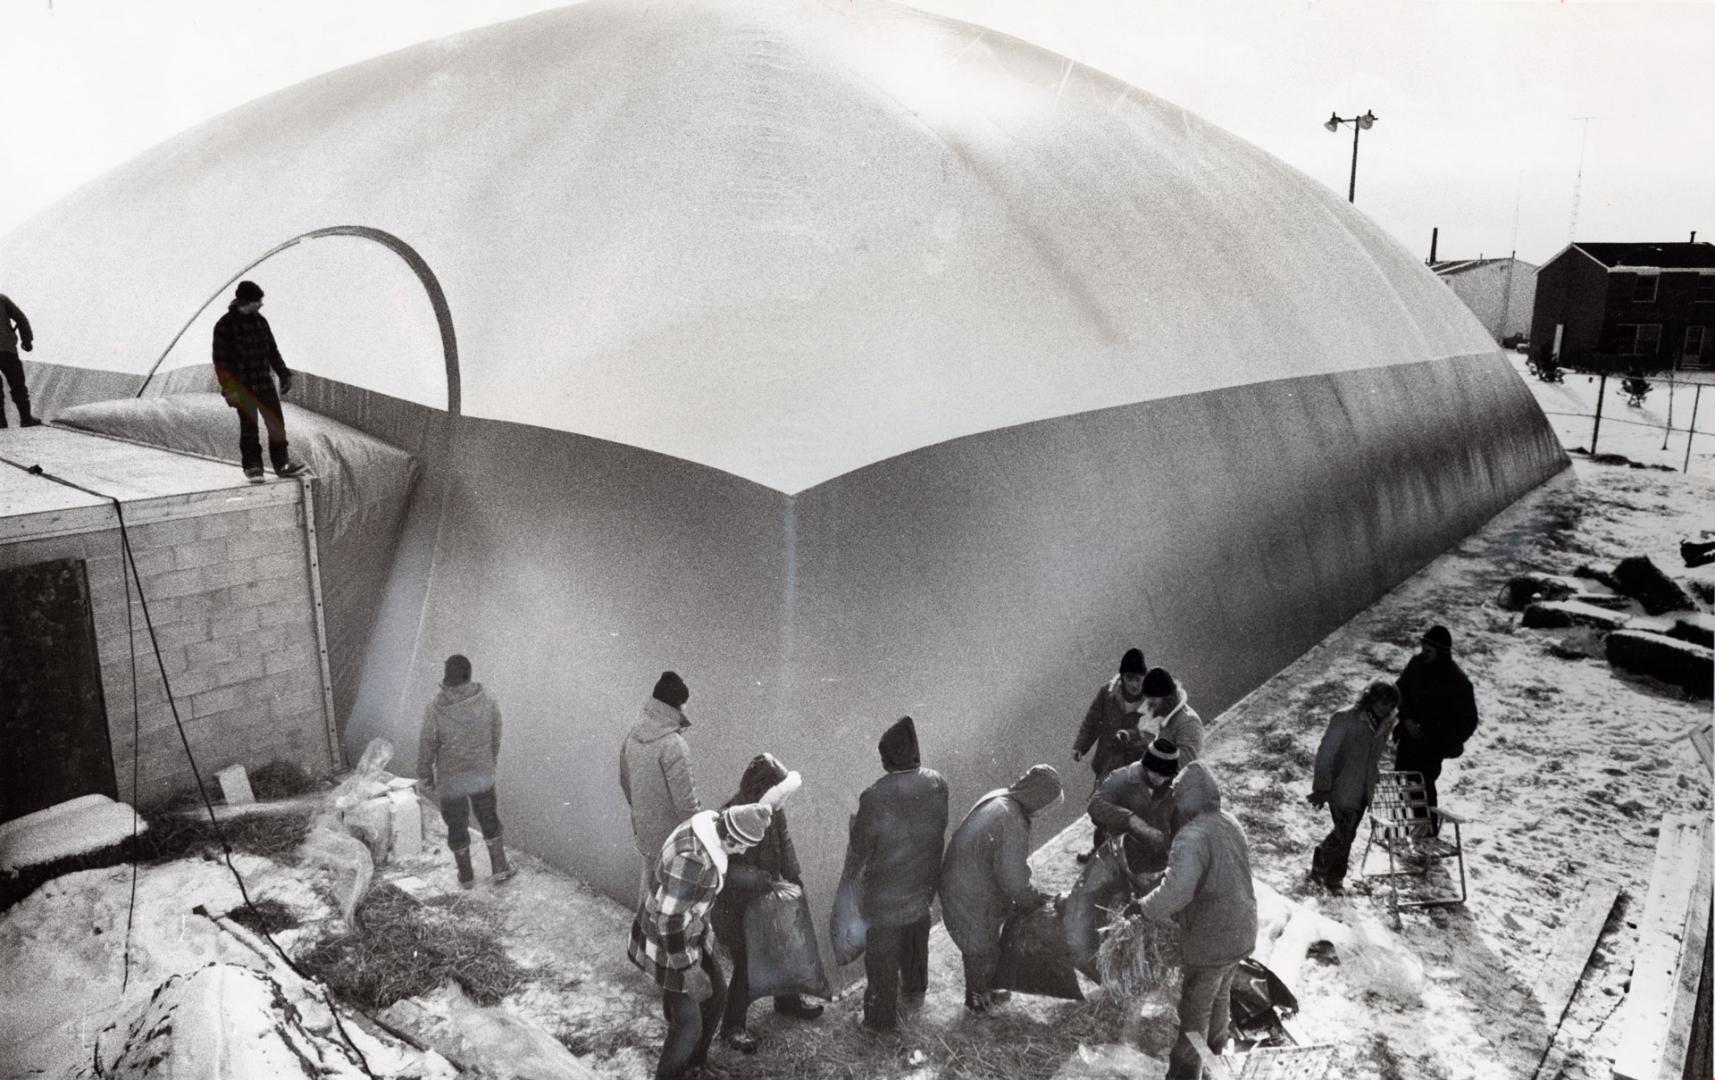 A 100-foot-square plastic bubble inflated over a Balmoral Dr. pool. Bramalea, Ontario